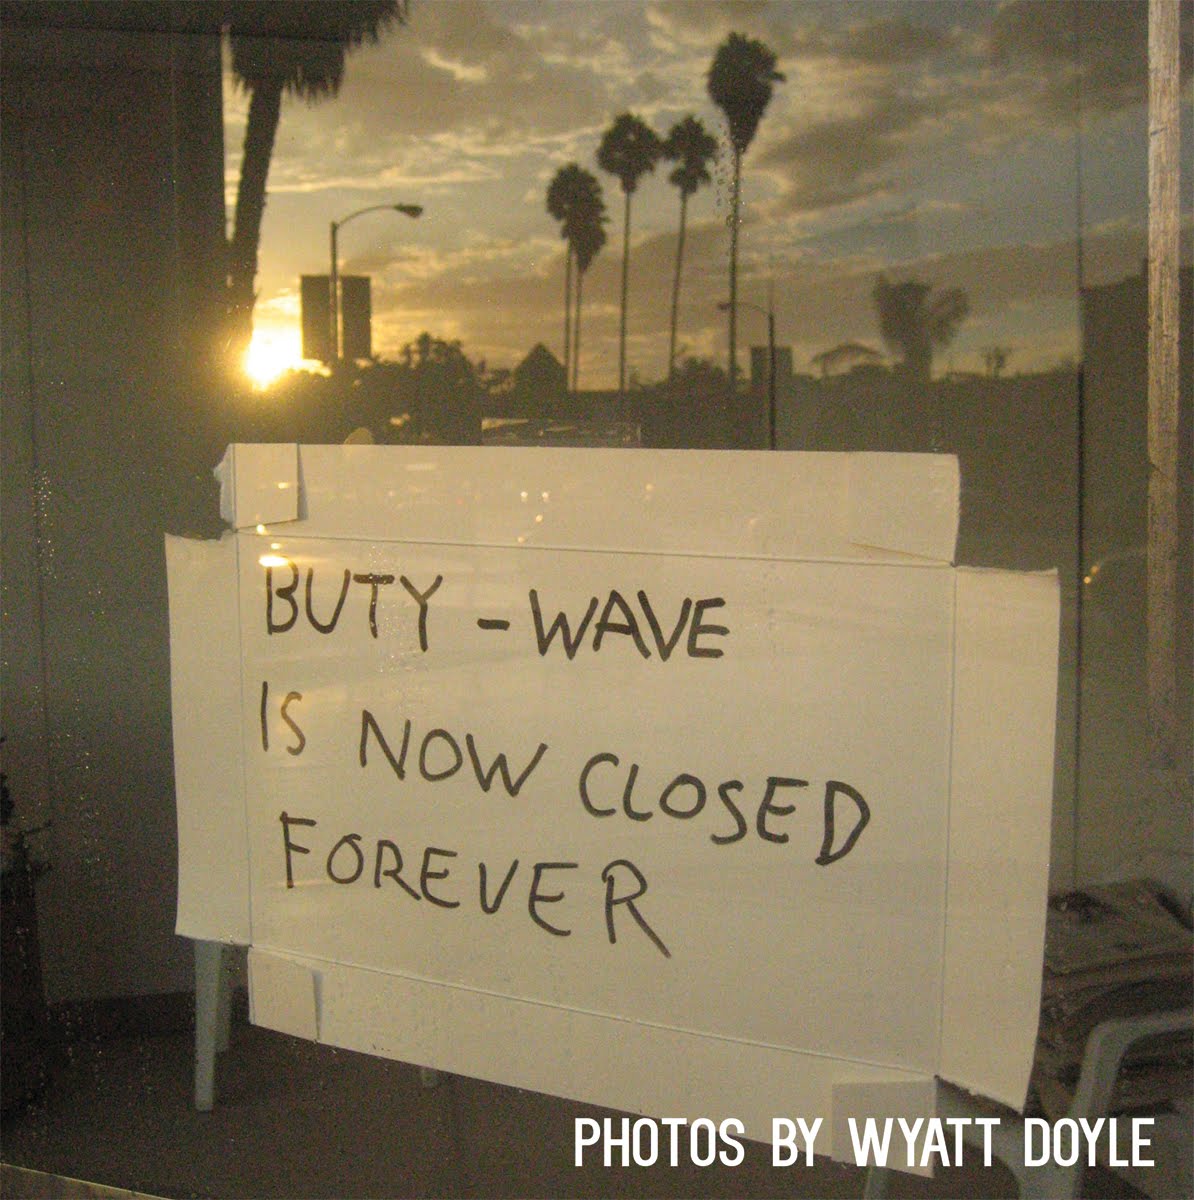 BUTY-WAVE IS NOW CLOSED FOREVER / Wyatt Doyle